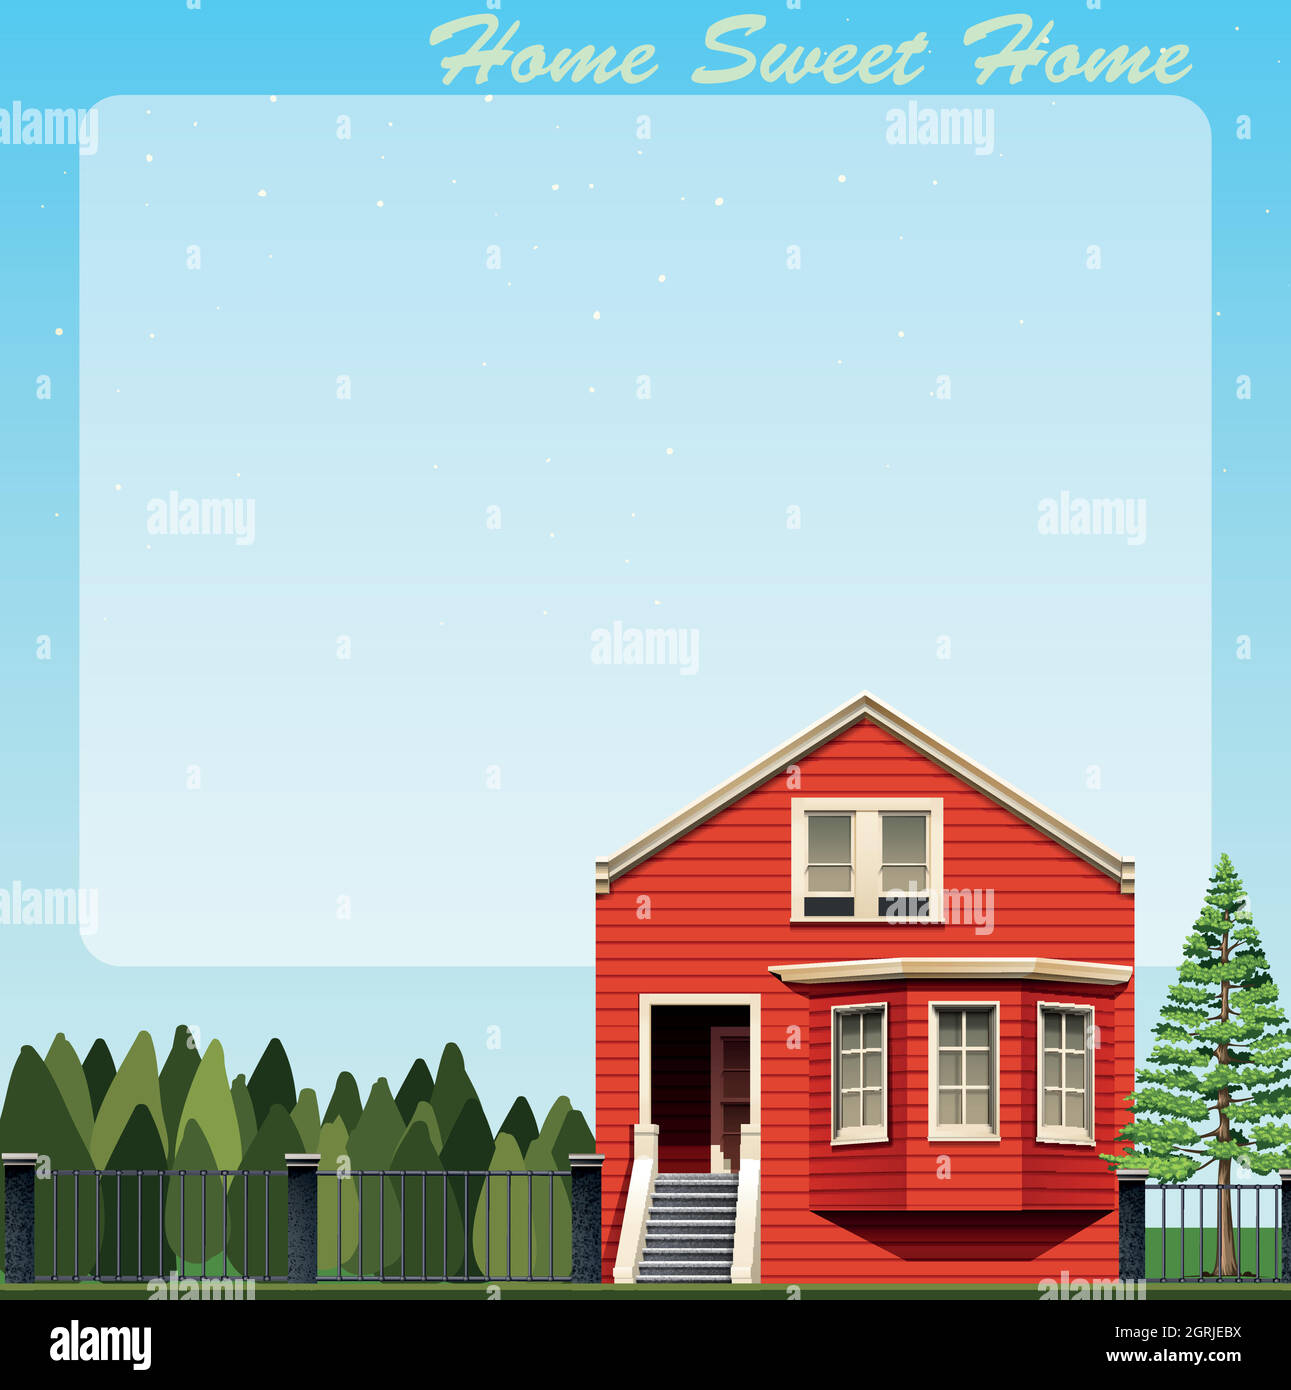 Home sweet home with red house Stock Vector